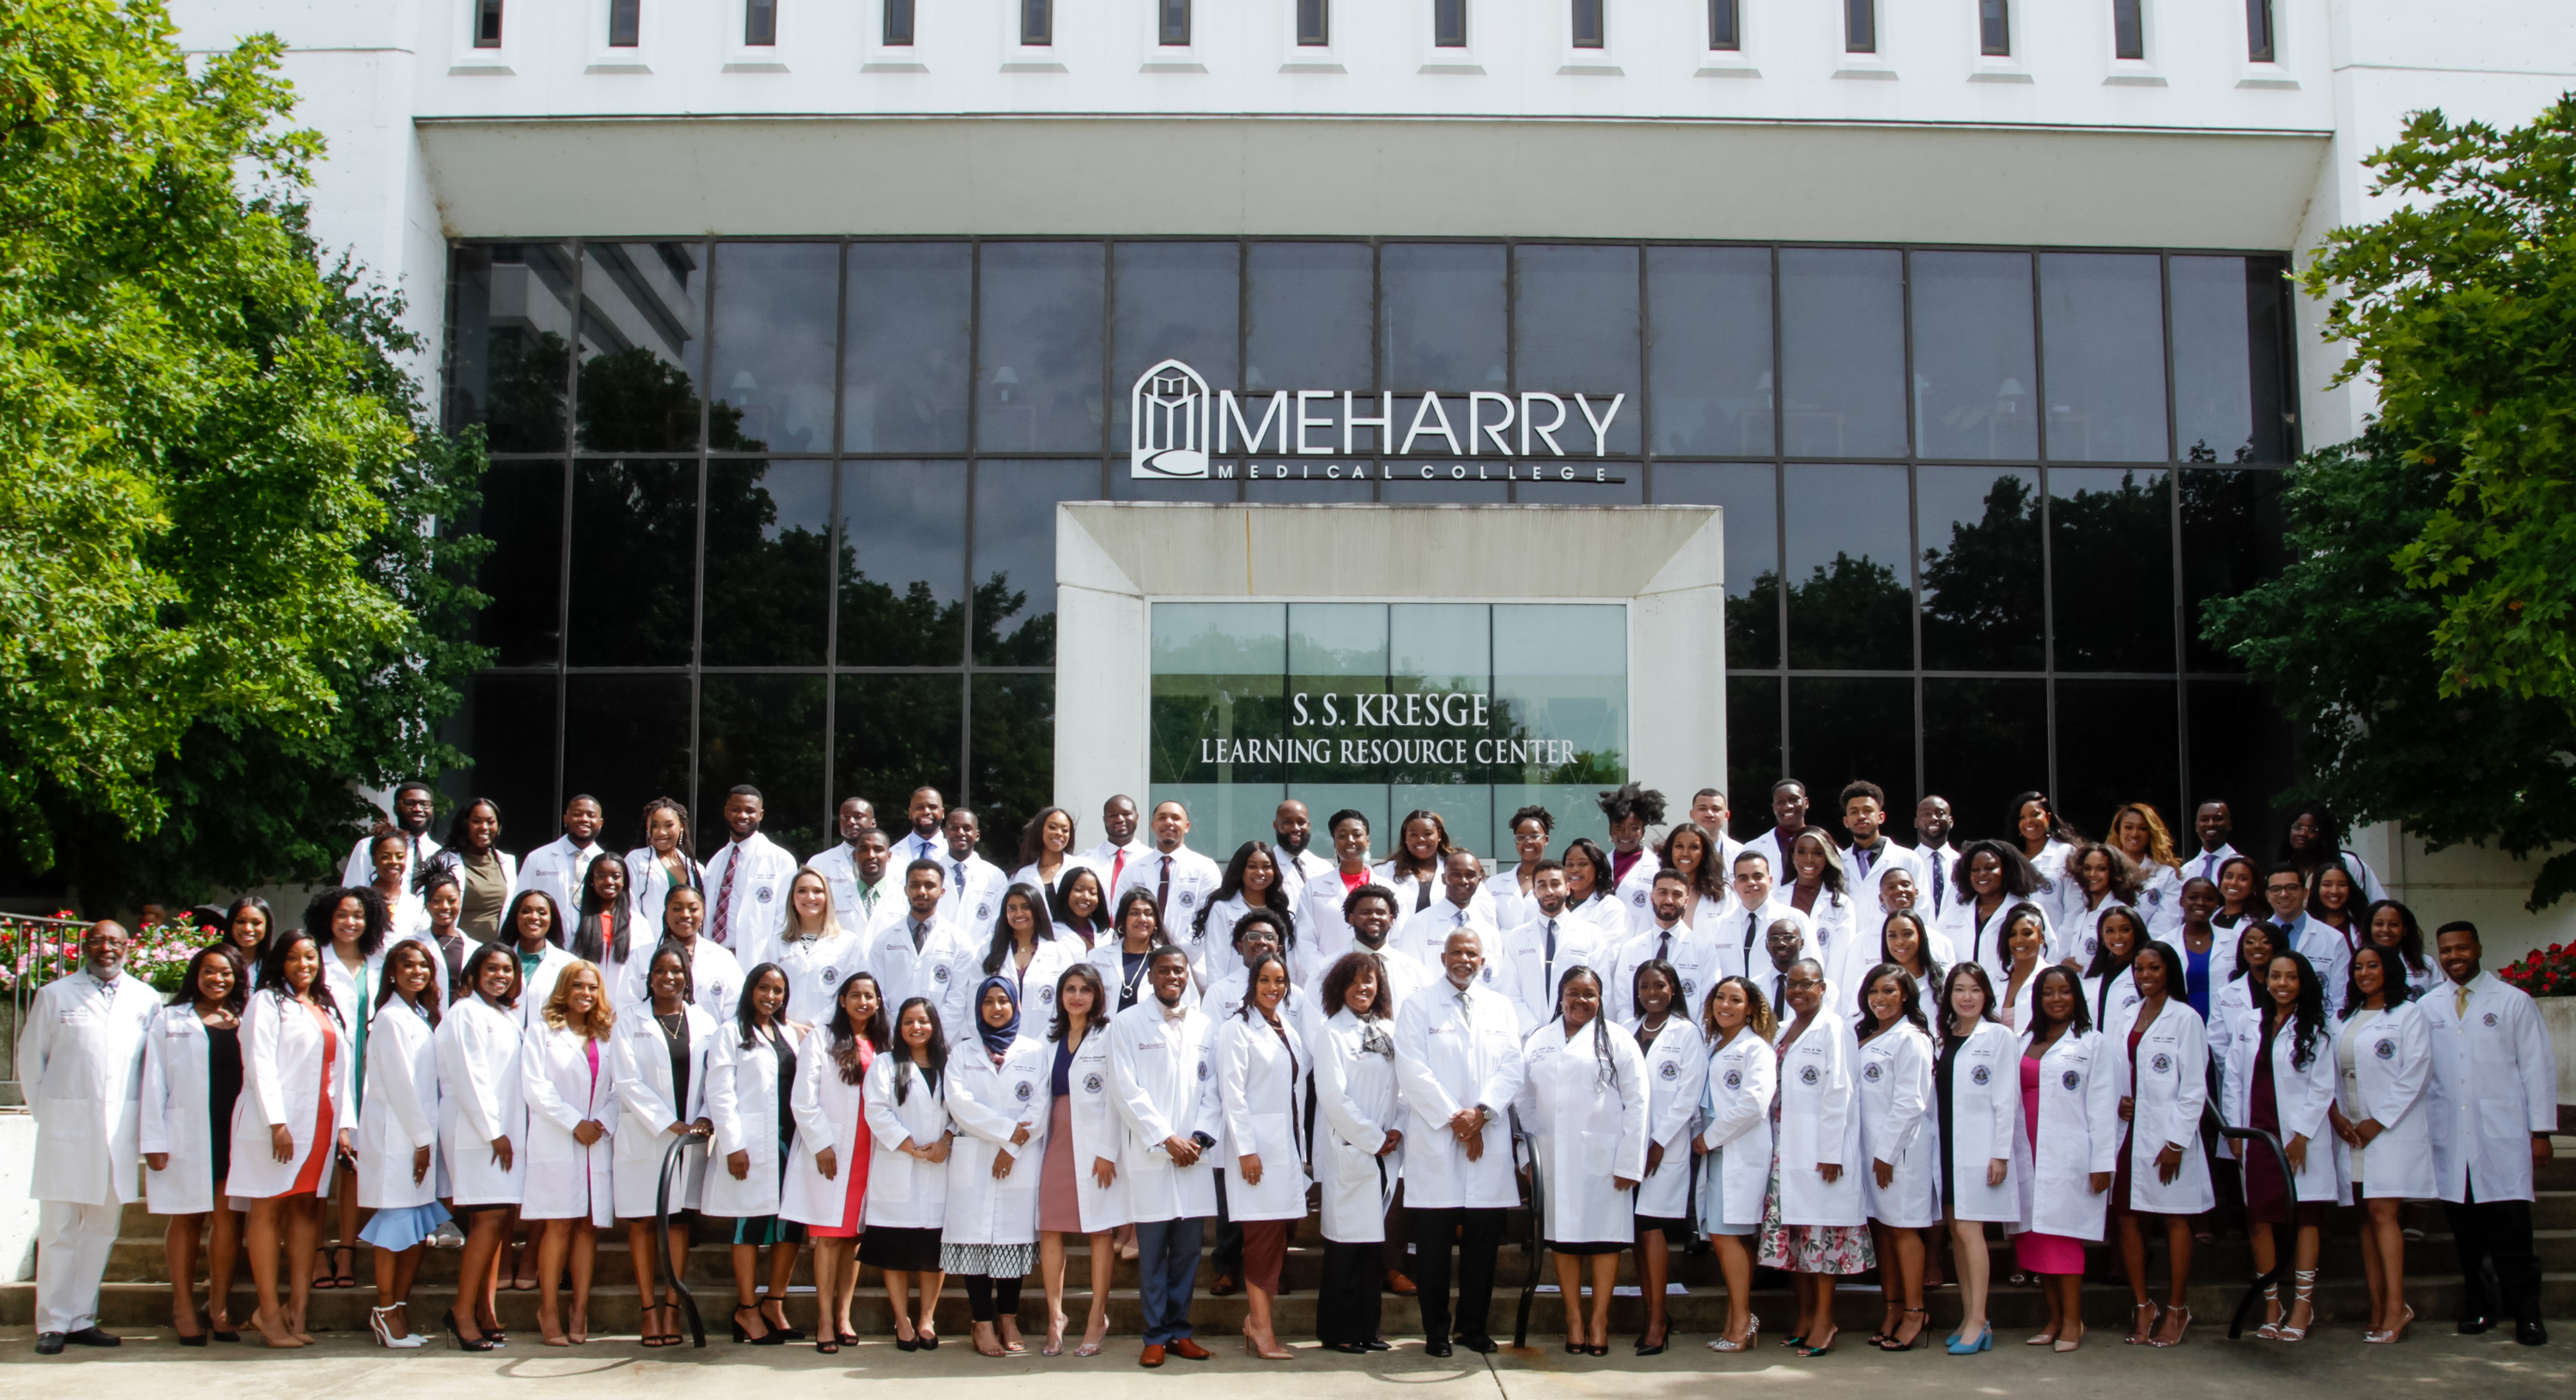 Group photo in front of the Meharry Medical College building.